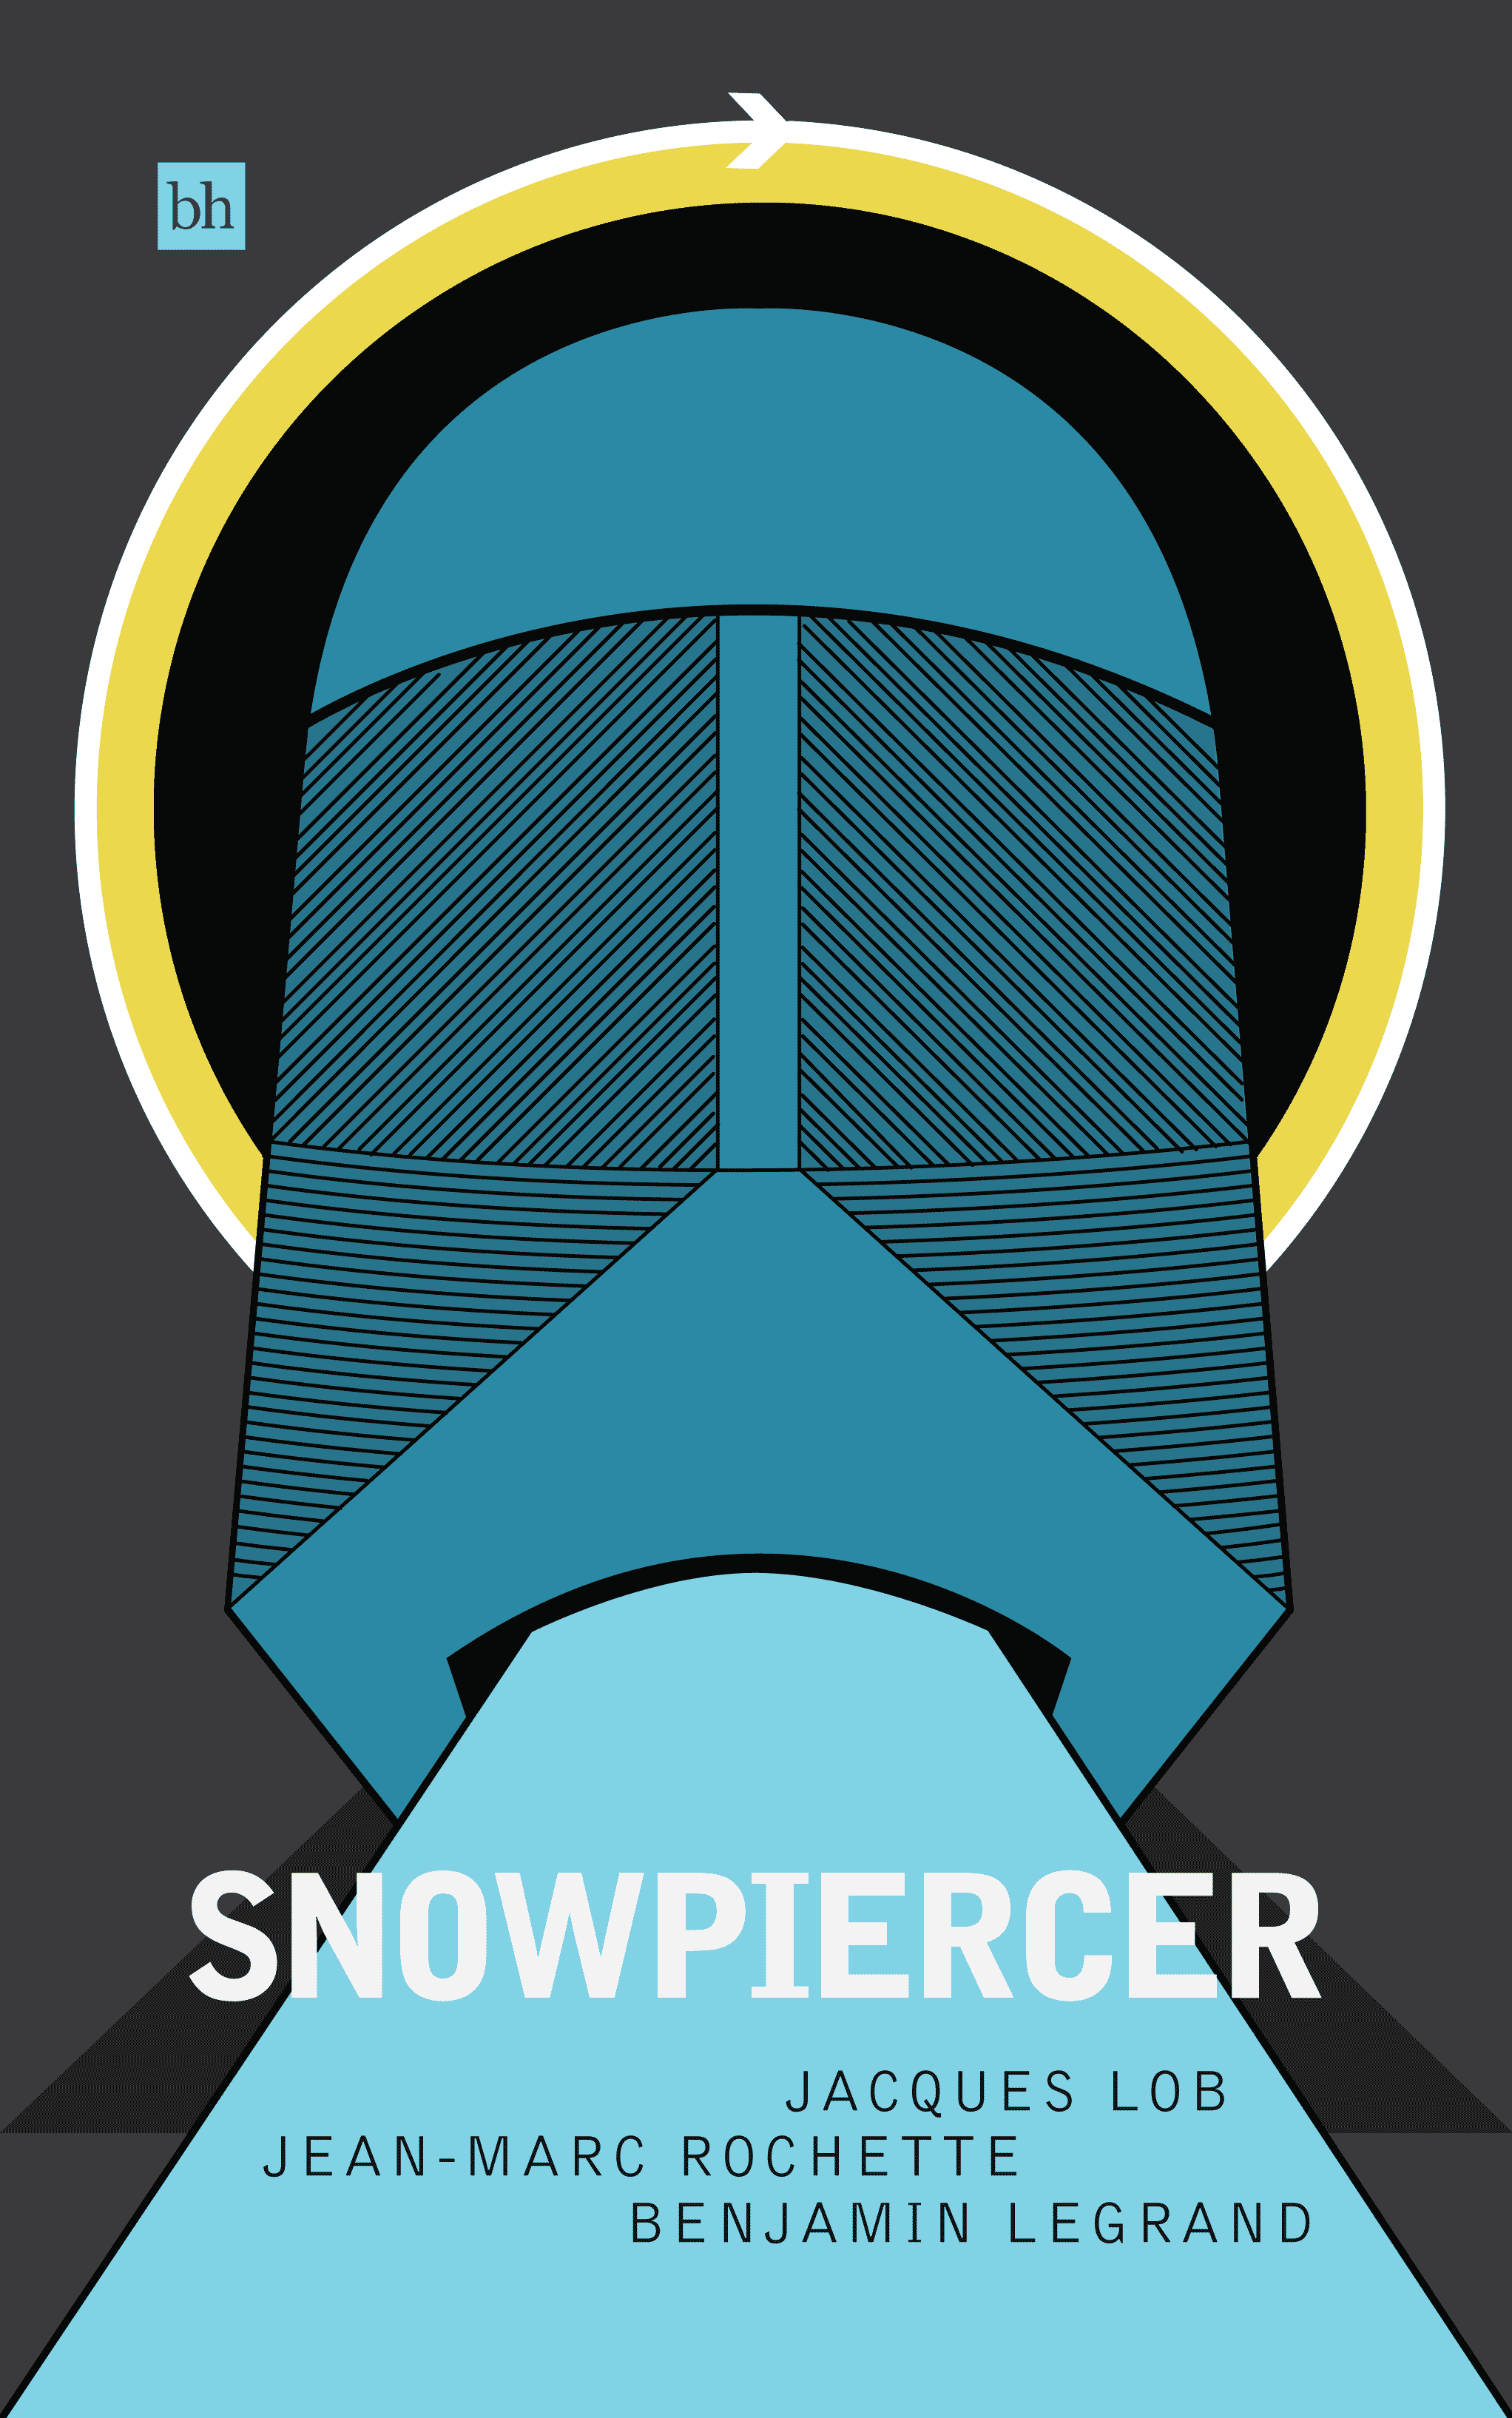 Snowpiercer by Jacques Lob and Benjamin Legrand